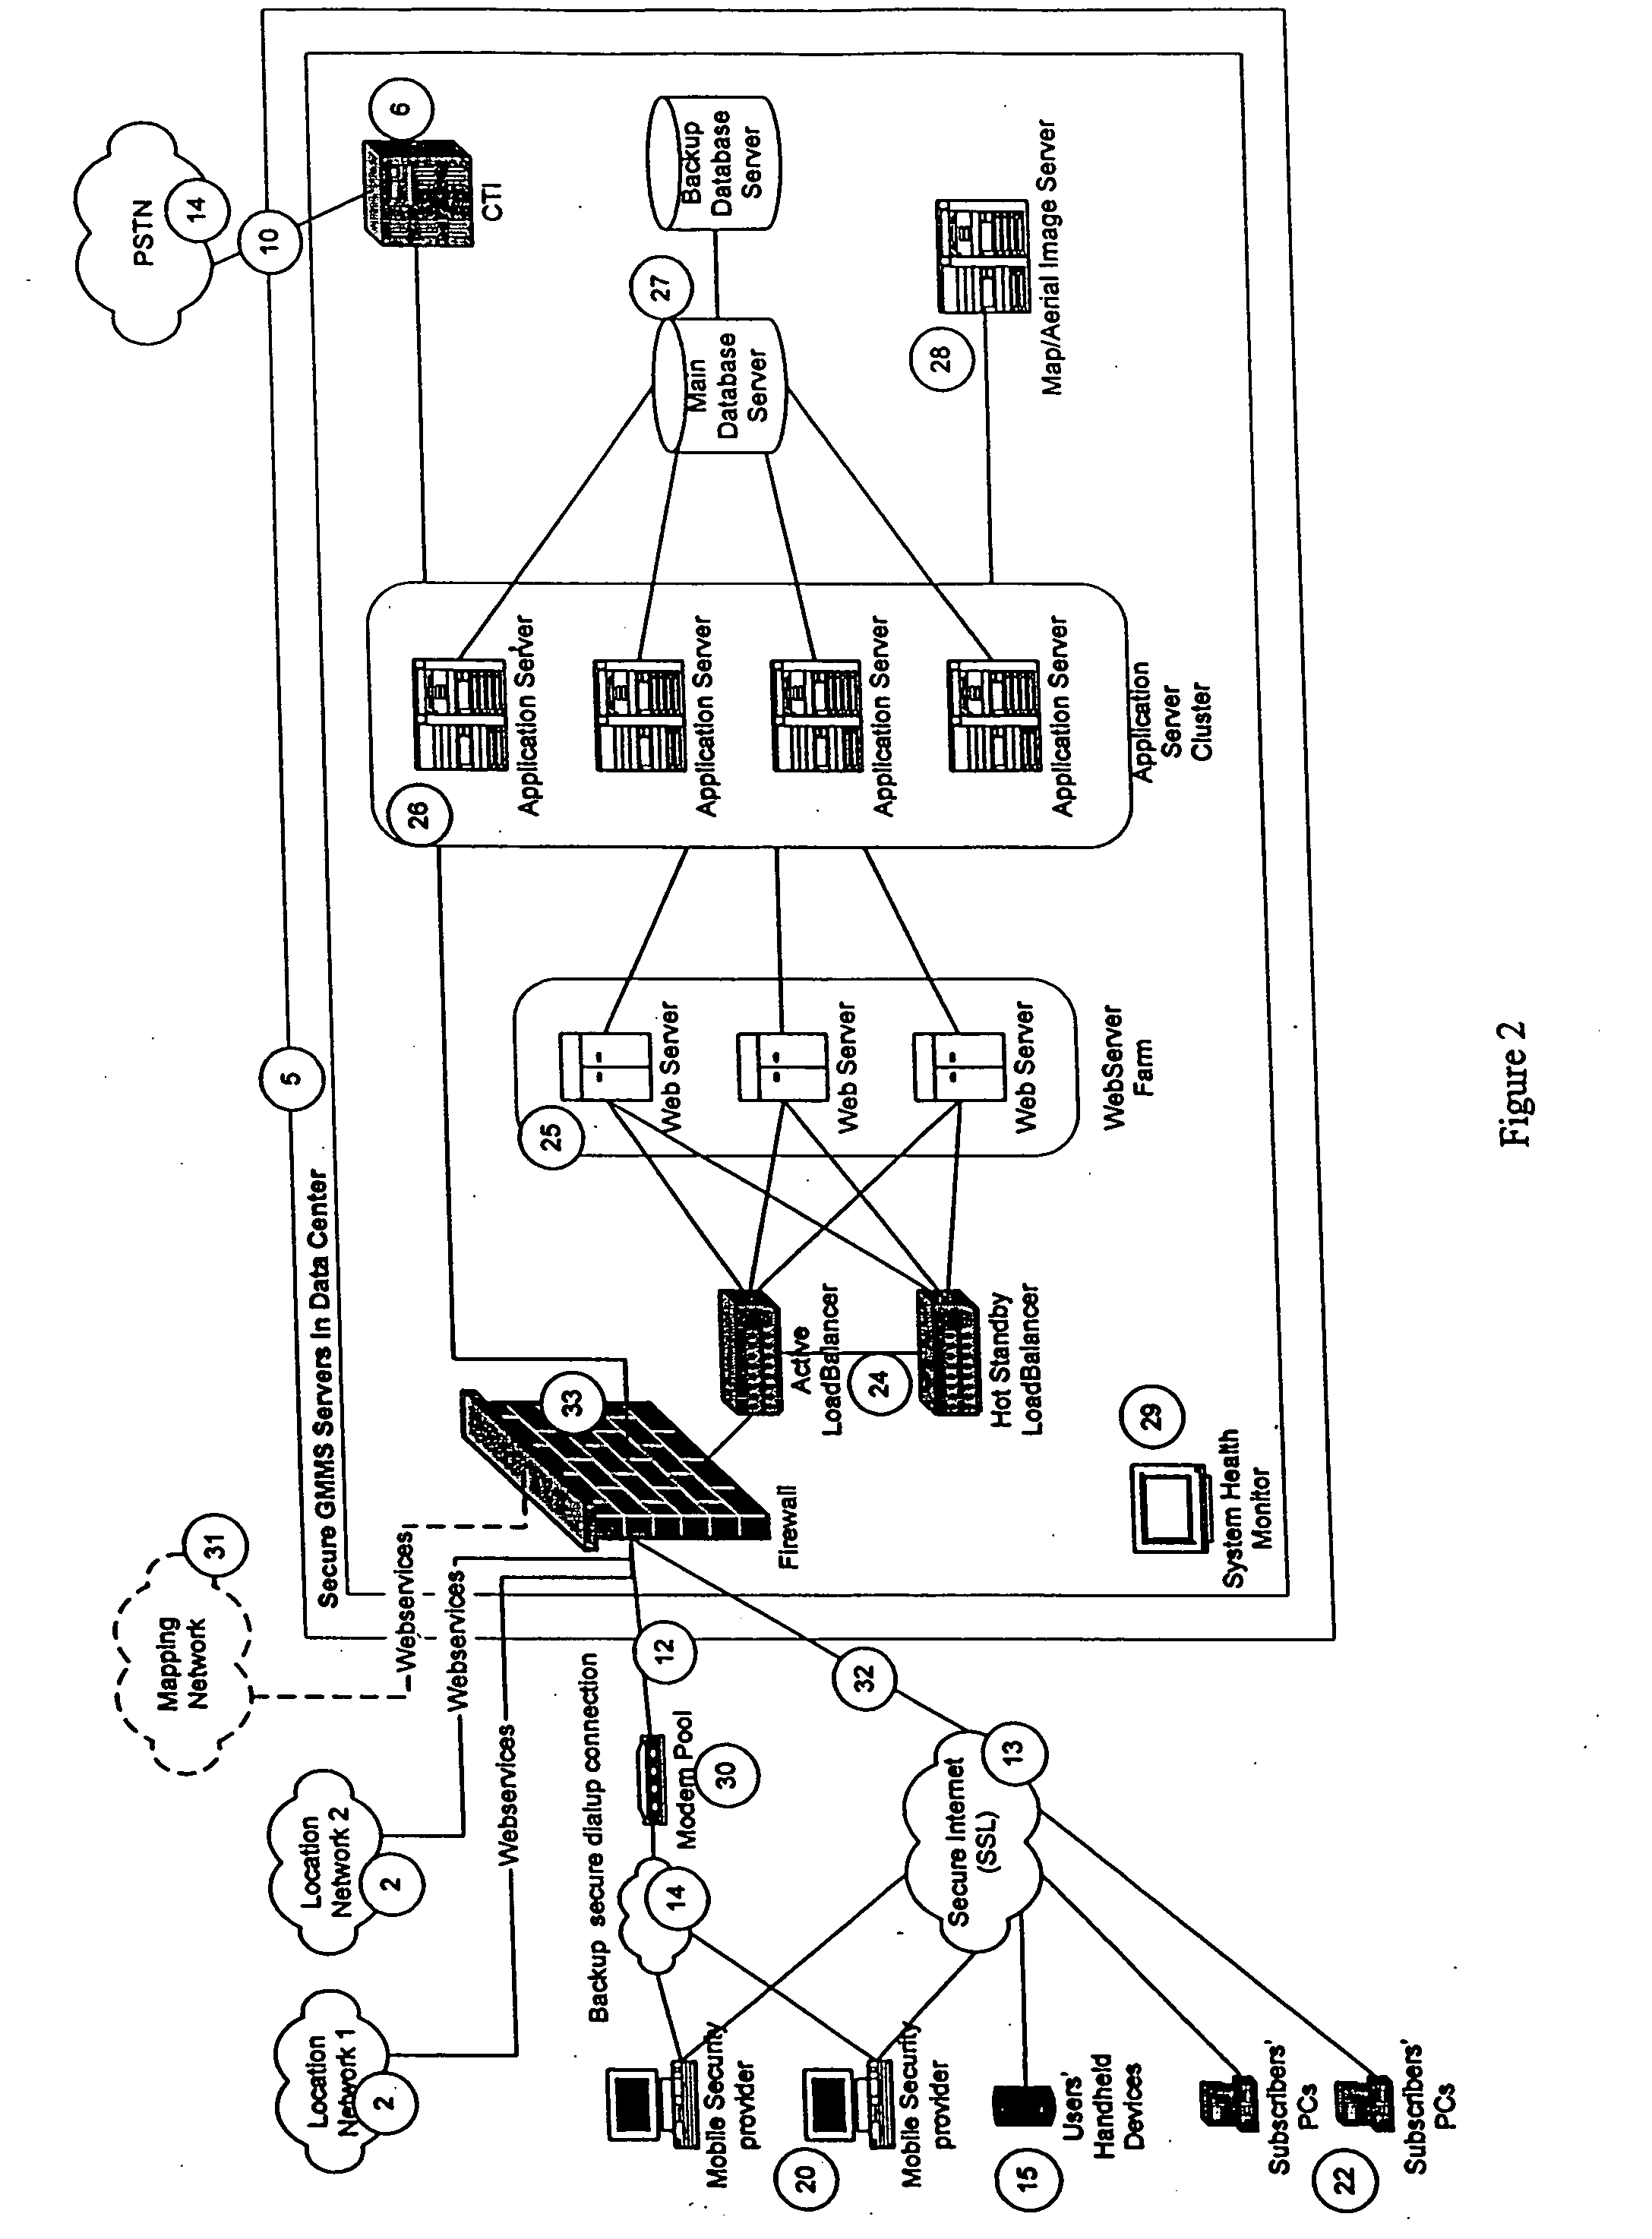 System for, and method of, monitoring the movements of mobile items